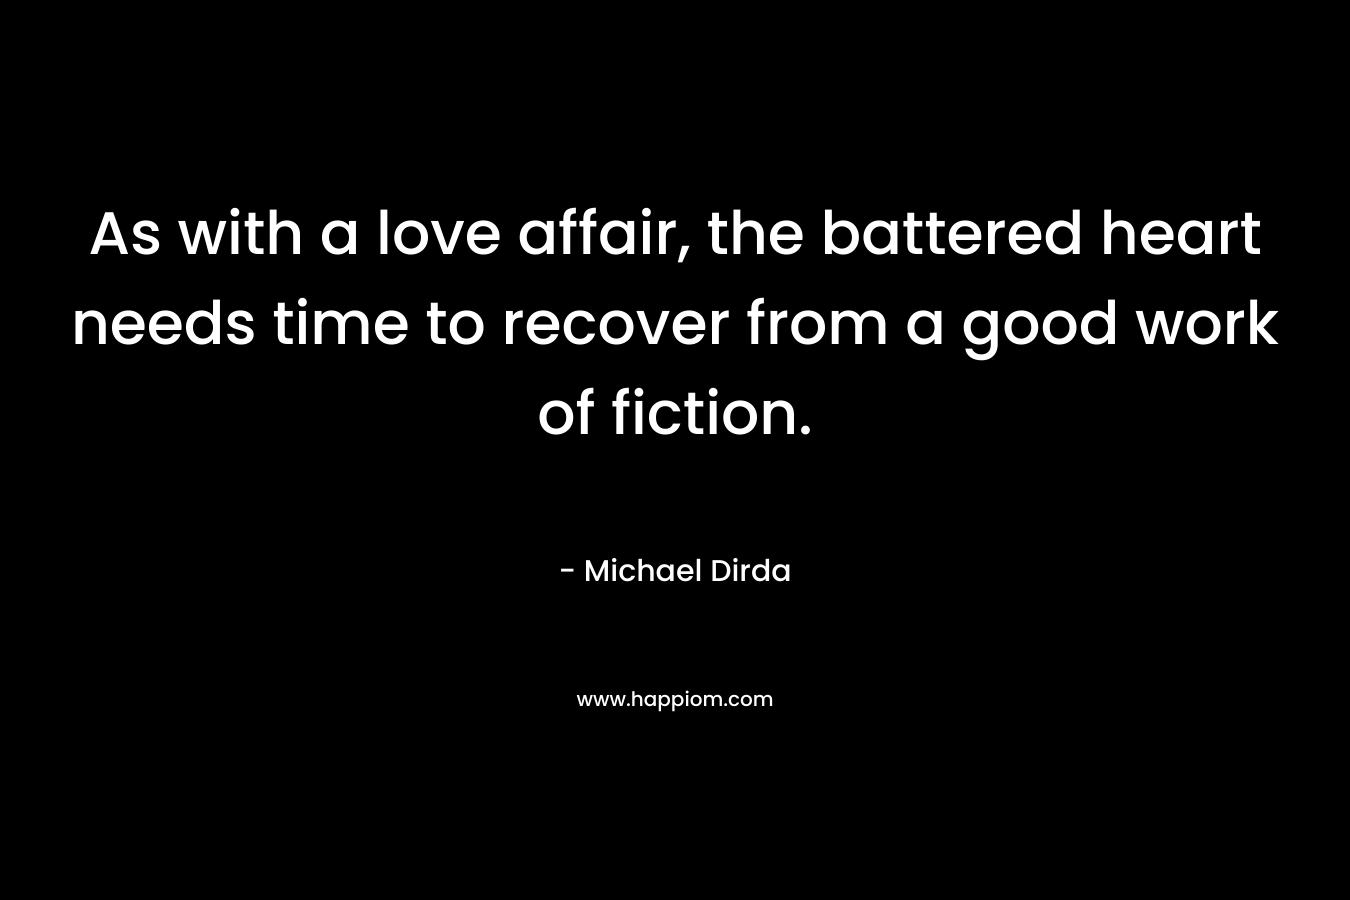 As with a love affair, the battered heart needs time to recover from a good work of fiction.